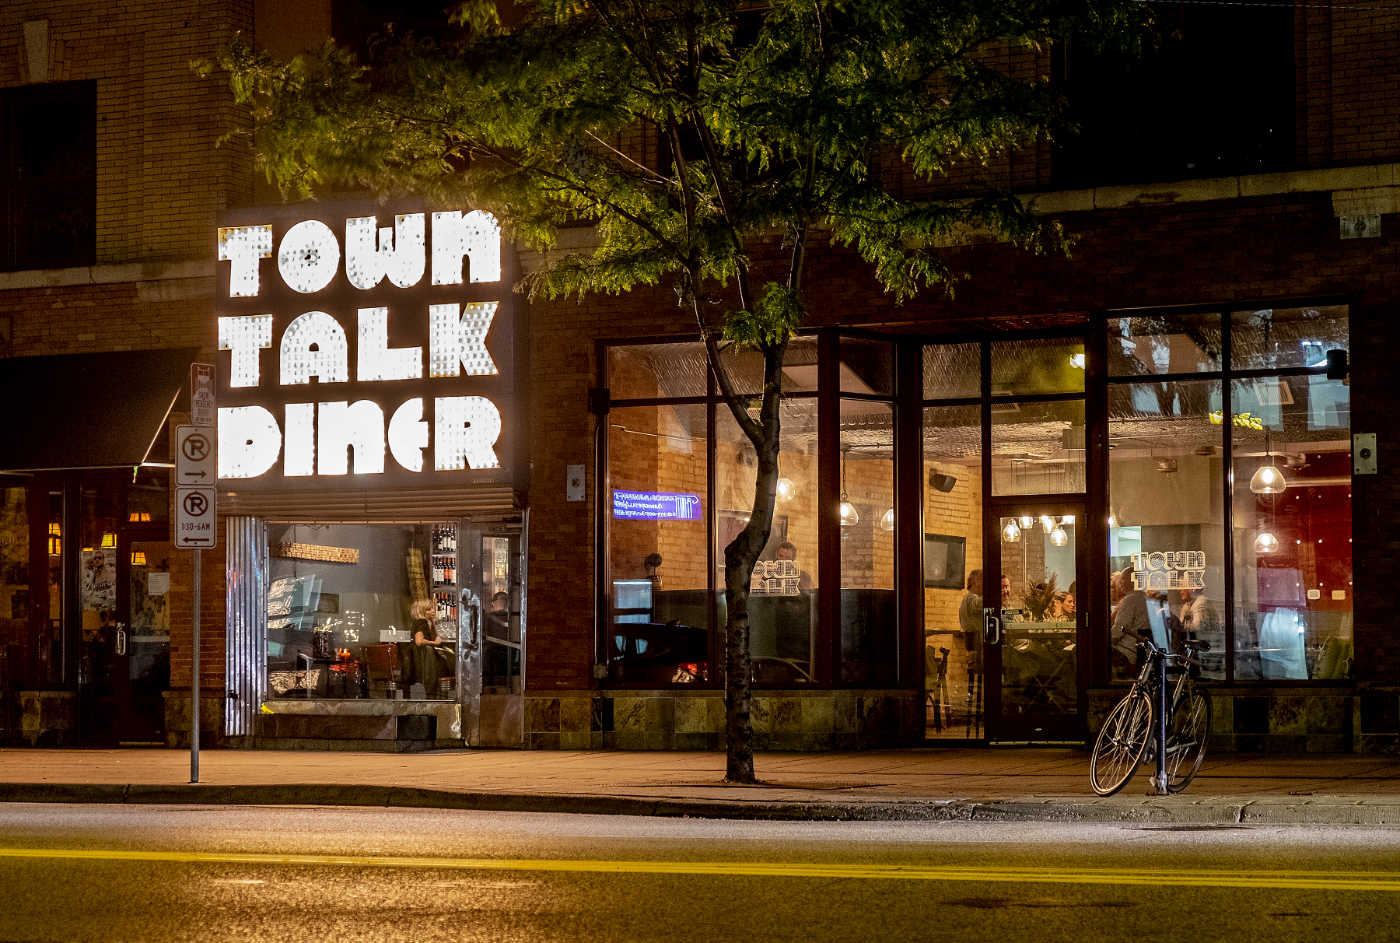 nighttime street scene of a lit-up storefront with a large bright sign reading TOWN TALK DINER